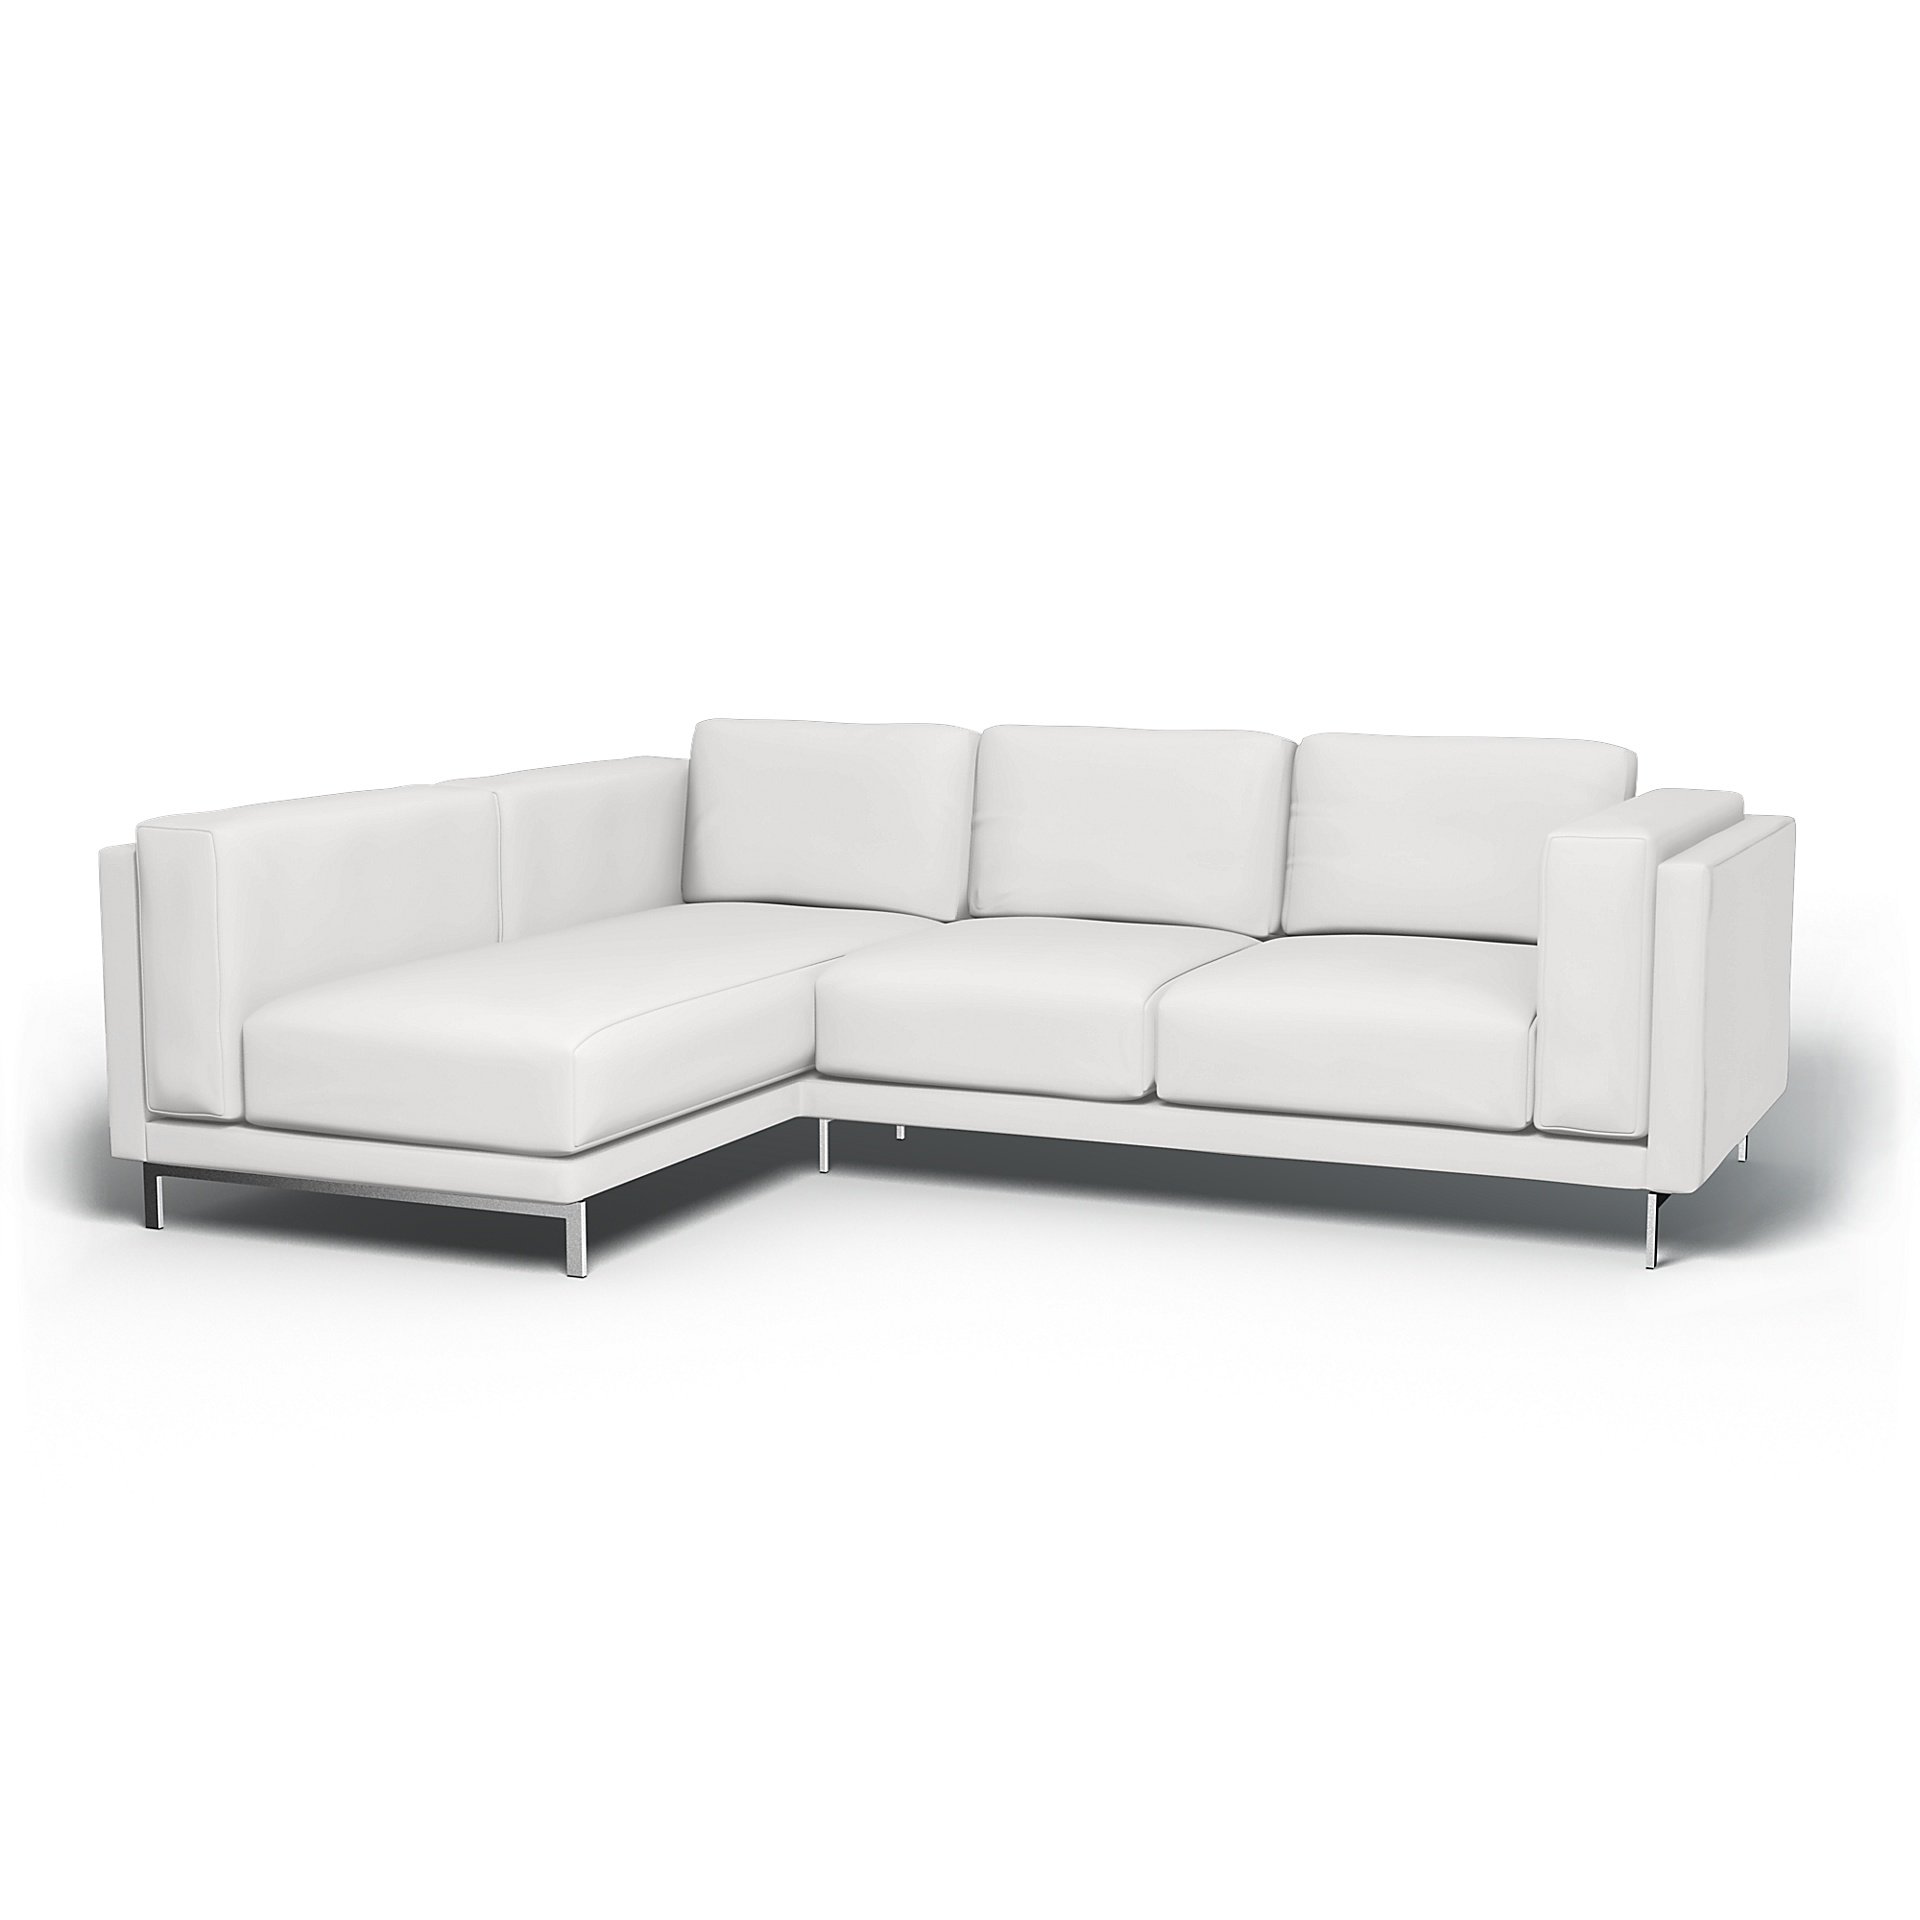 IKEA - Nockeby 3 Seater Sofa with Left Chaise Cover, Absolute White, Cotton - Bemz